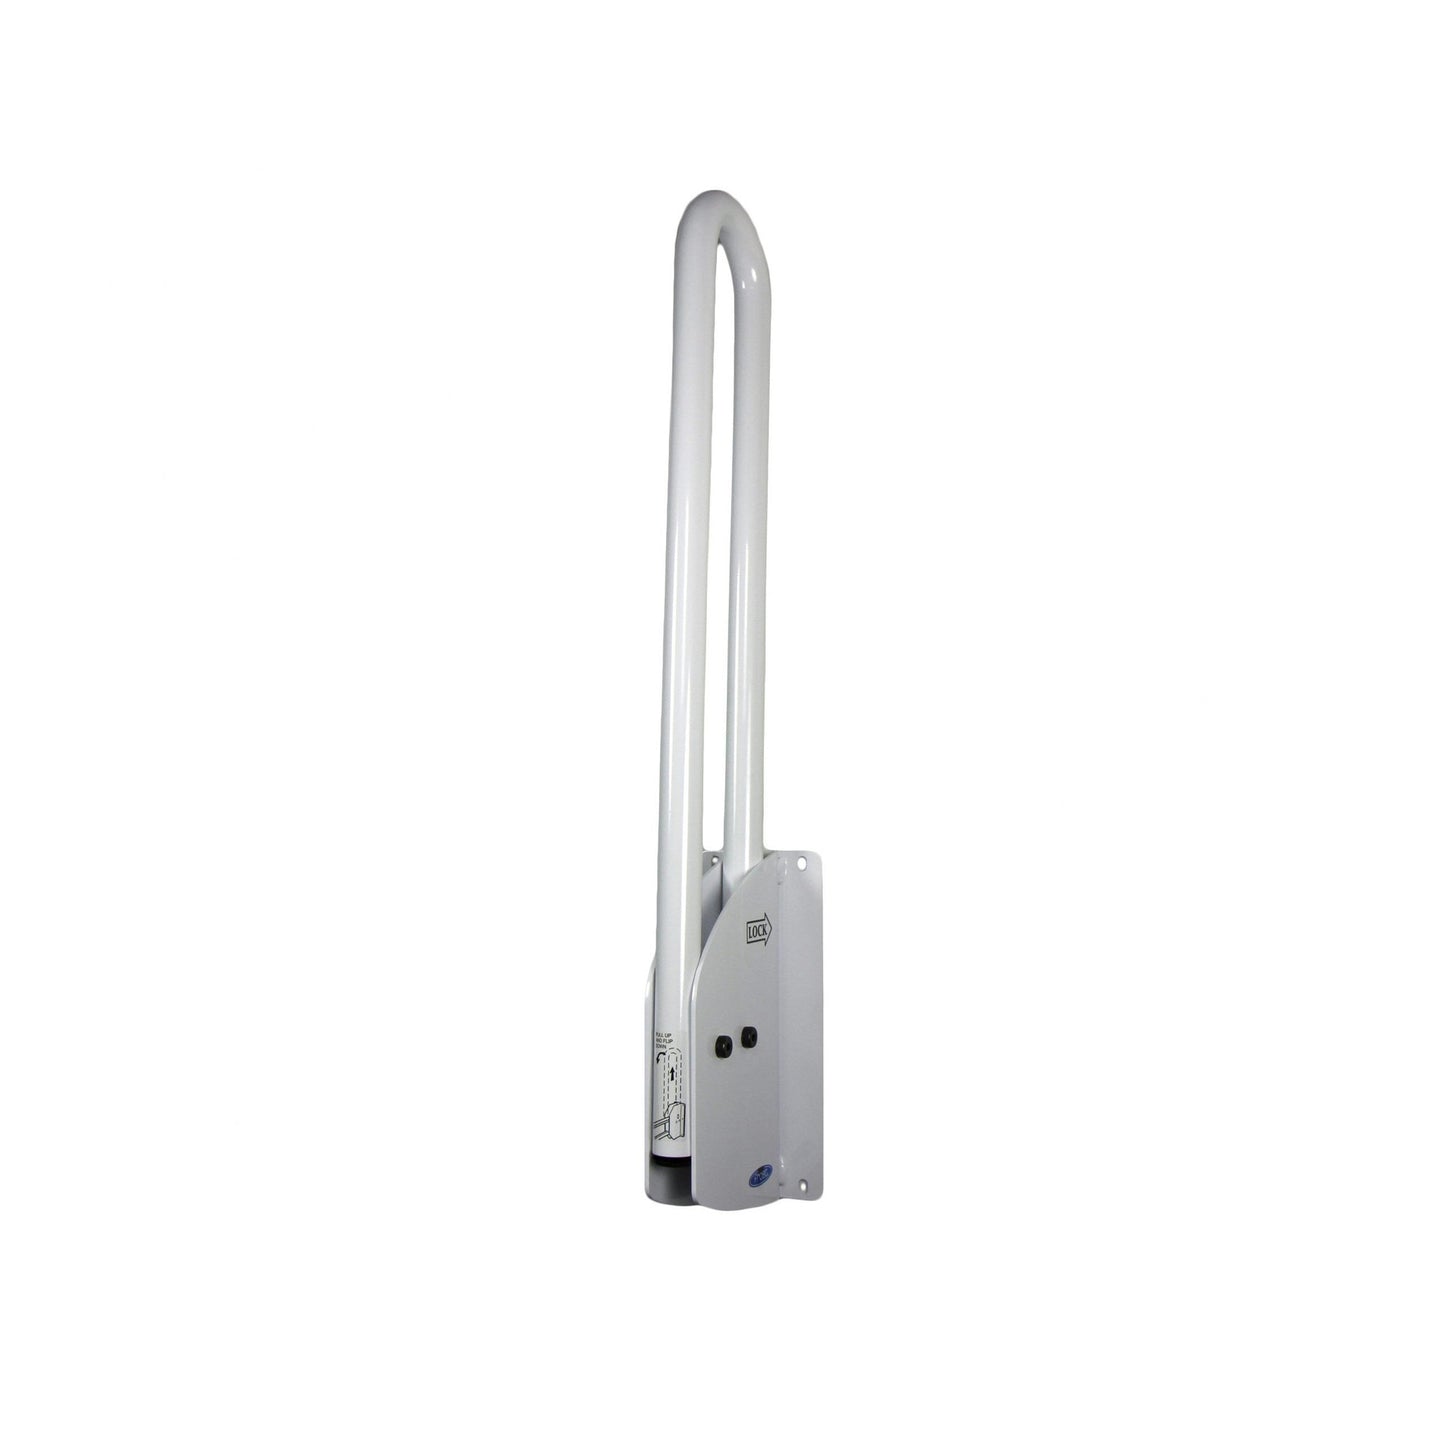 Frost 1055-W Swing Up Wall Mounted White Grab Bar